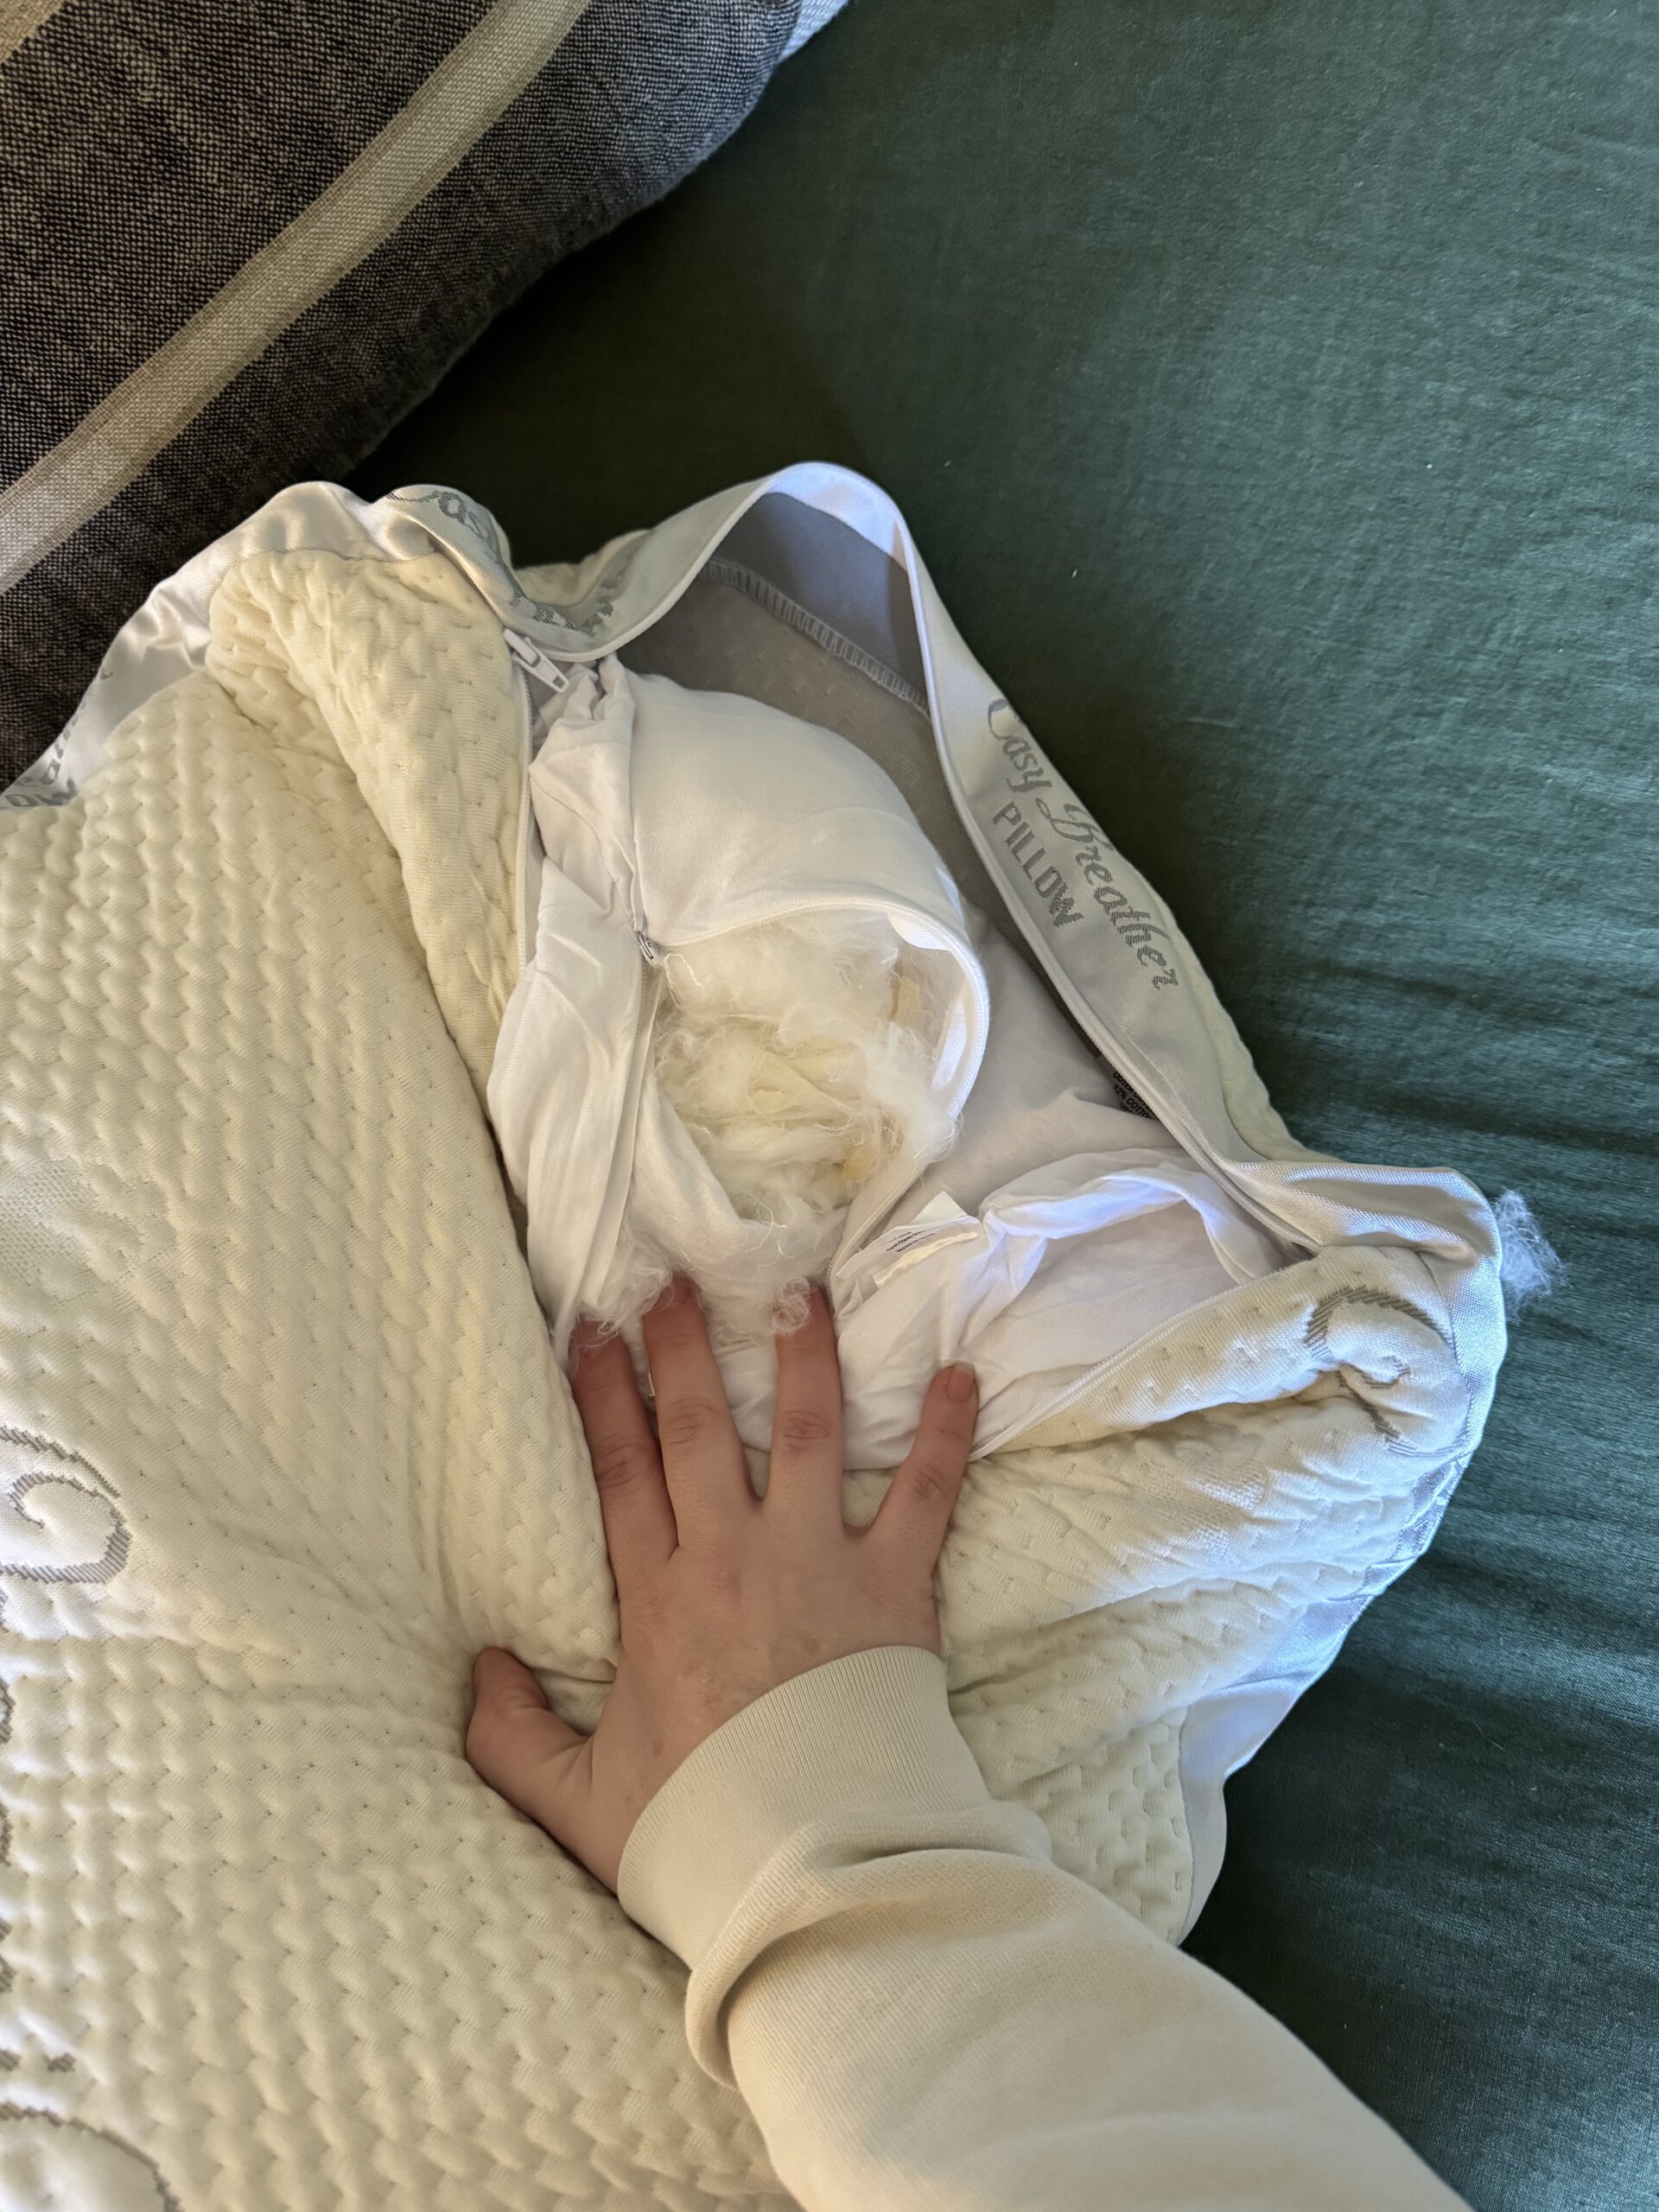 A person's hand pressing down on a white, plush blanket with a fabric tag visible.